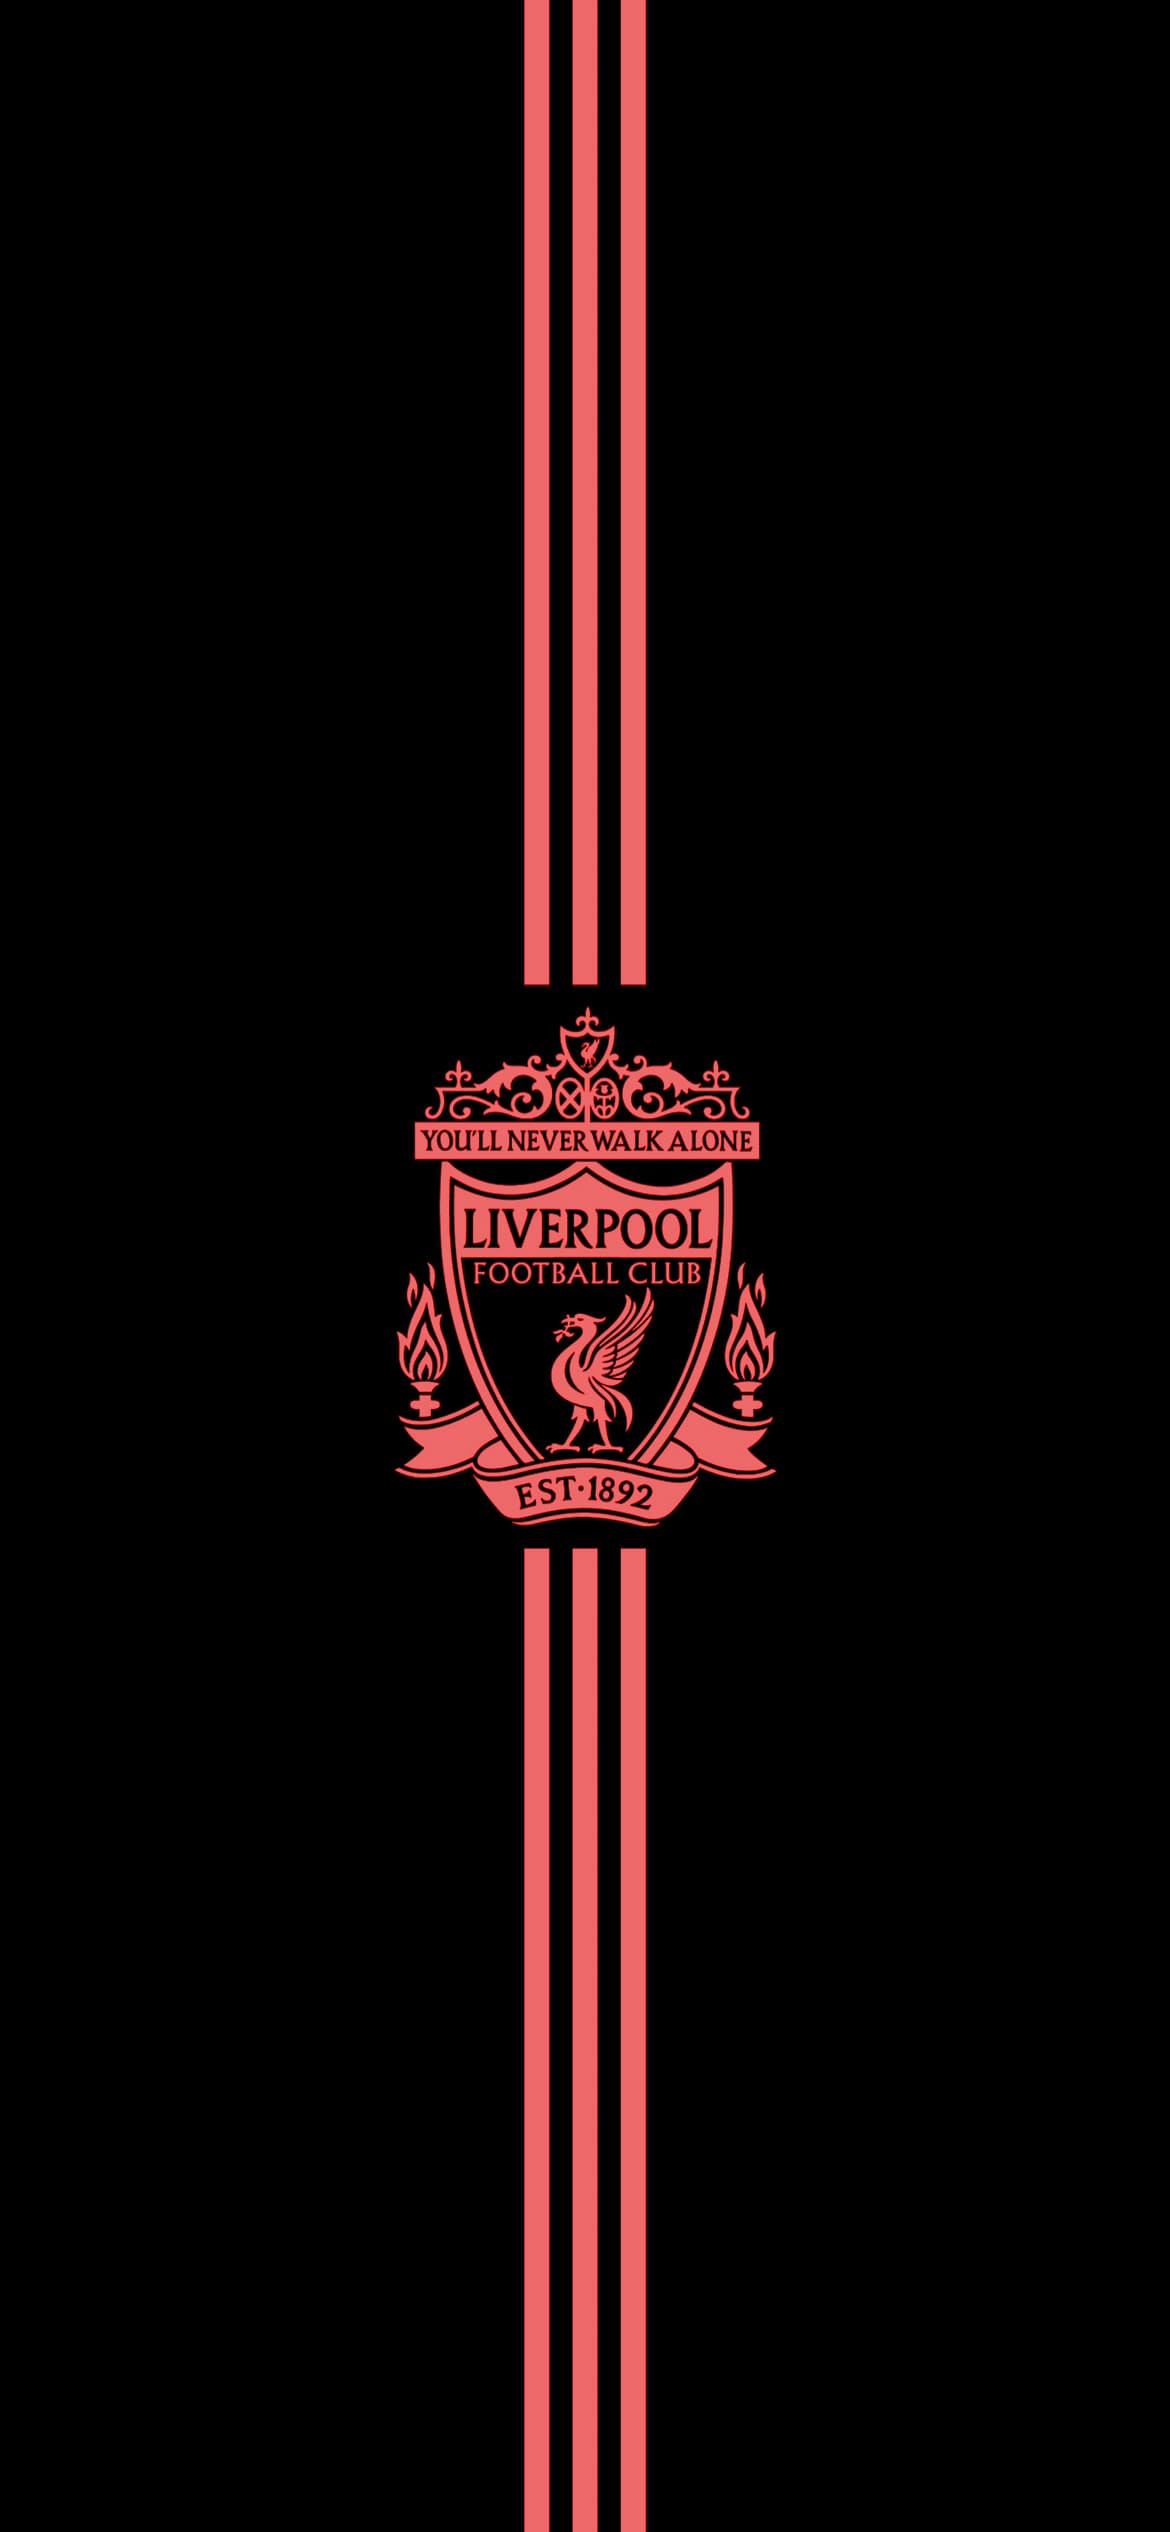 Top 999+ Liverpool Fc Wallpaper Full HD, 4K✓Free to Use